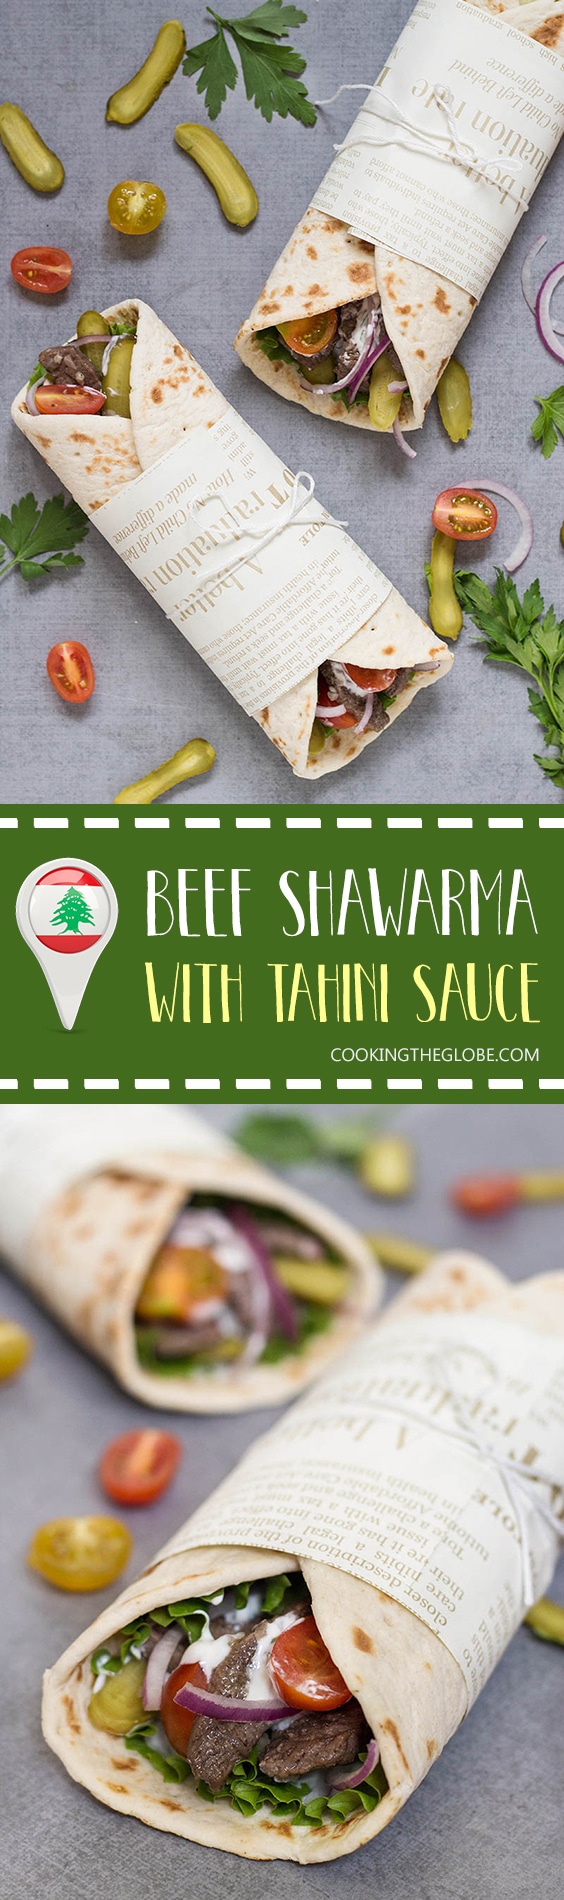 This Lebanese Beef Shawarma has everything you need: the tender meat, veggies, and the amazing tahini sauce. All this goodness wrapped in a pita bread. Perfection!